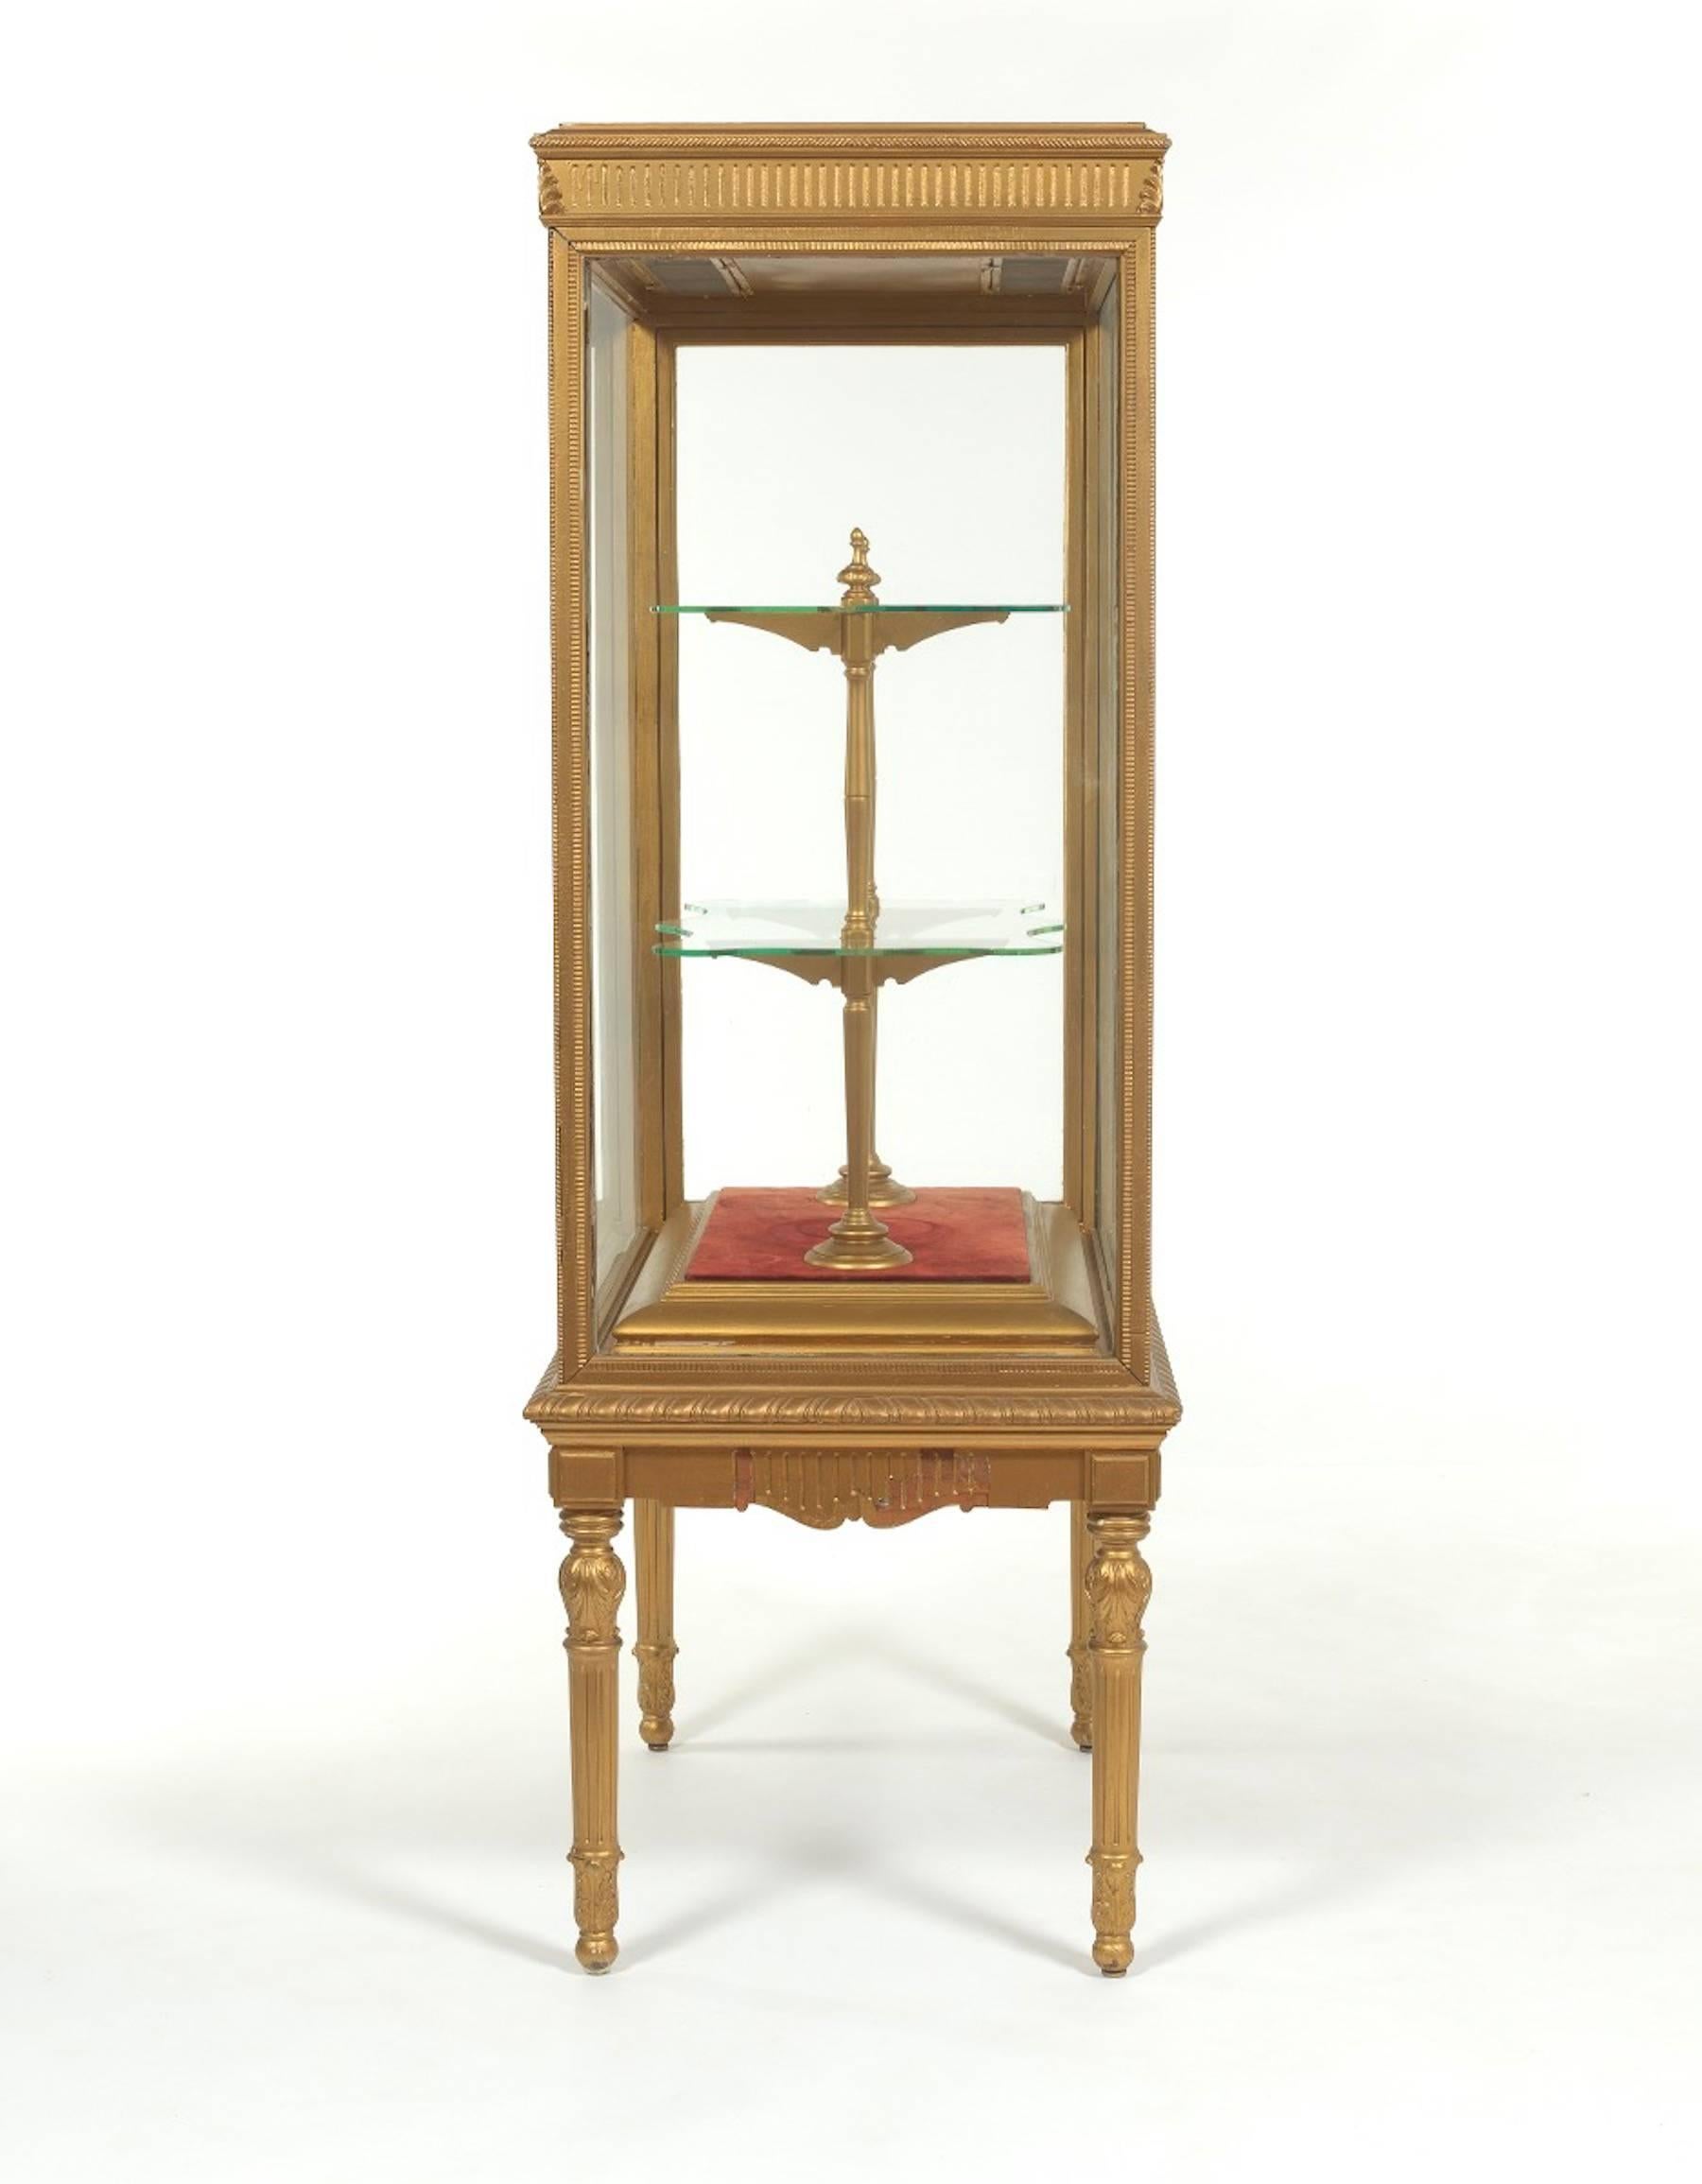 Early 20th Century Pair of French Neoclassical Giltwood Standing Cabinets or Vitrines